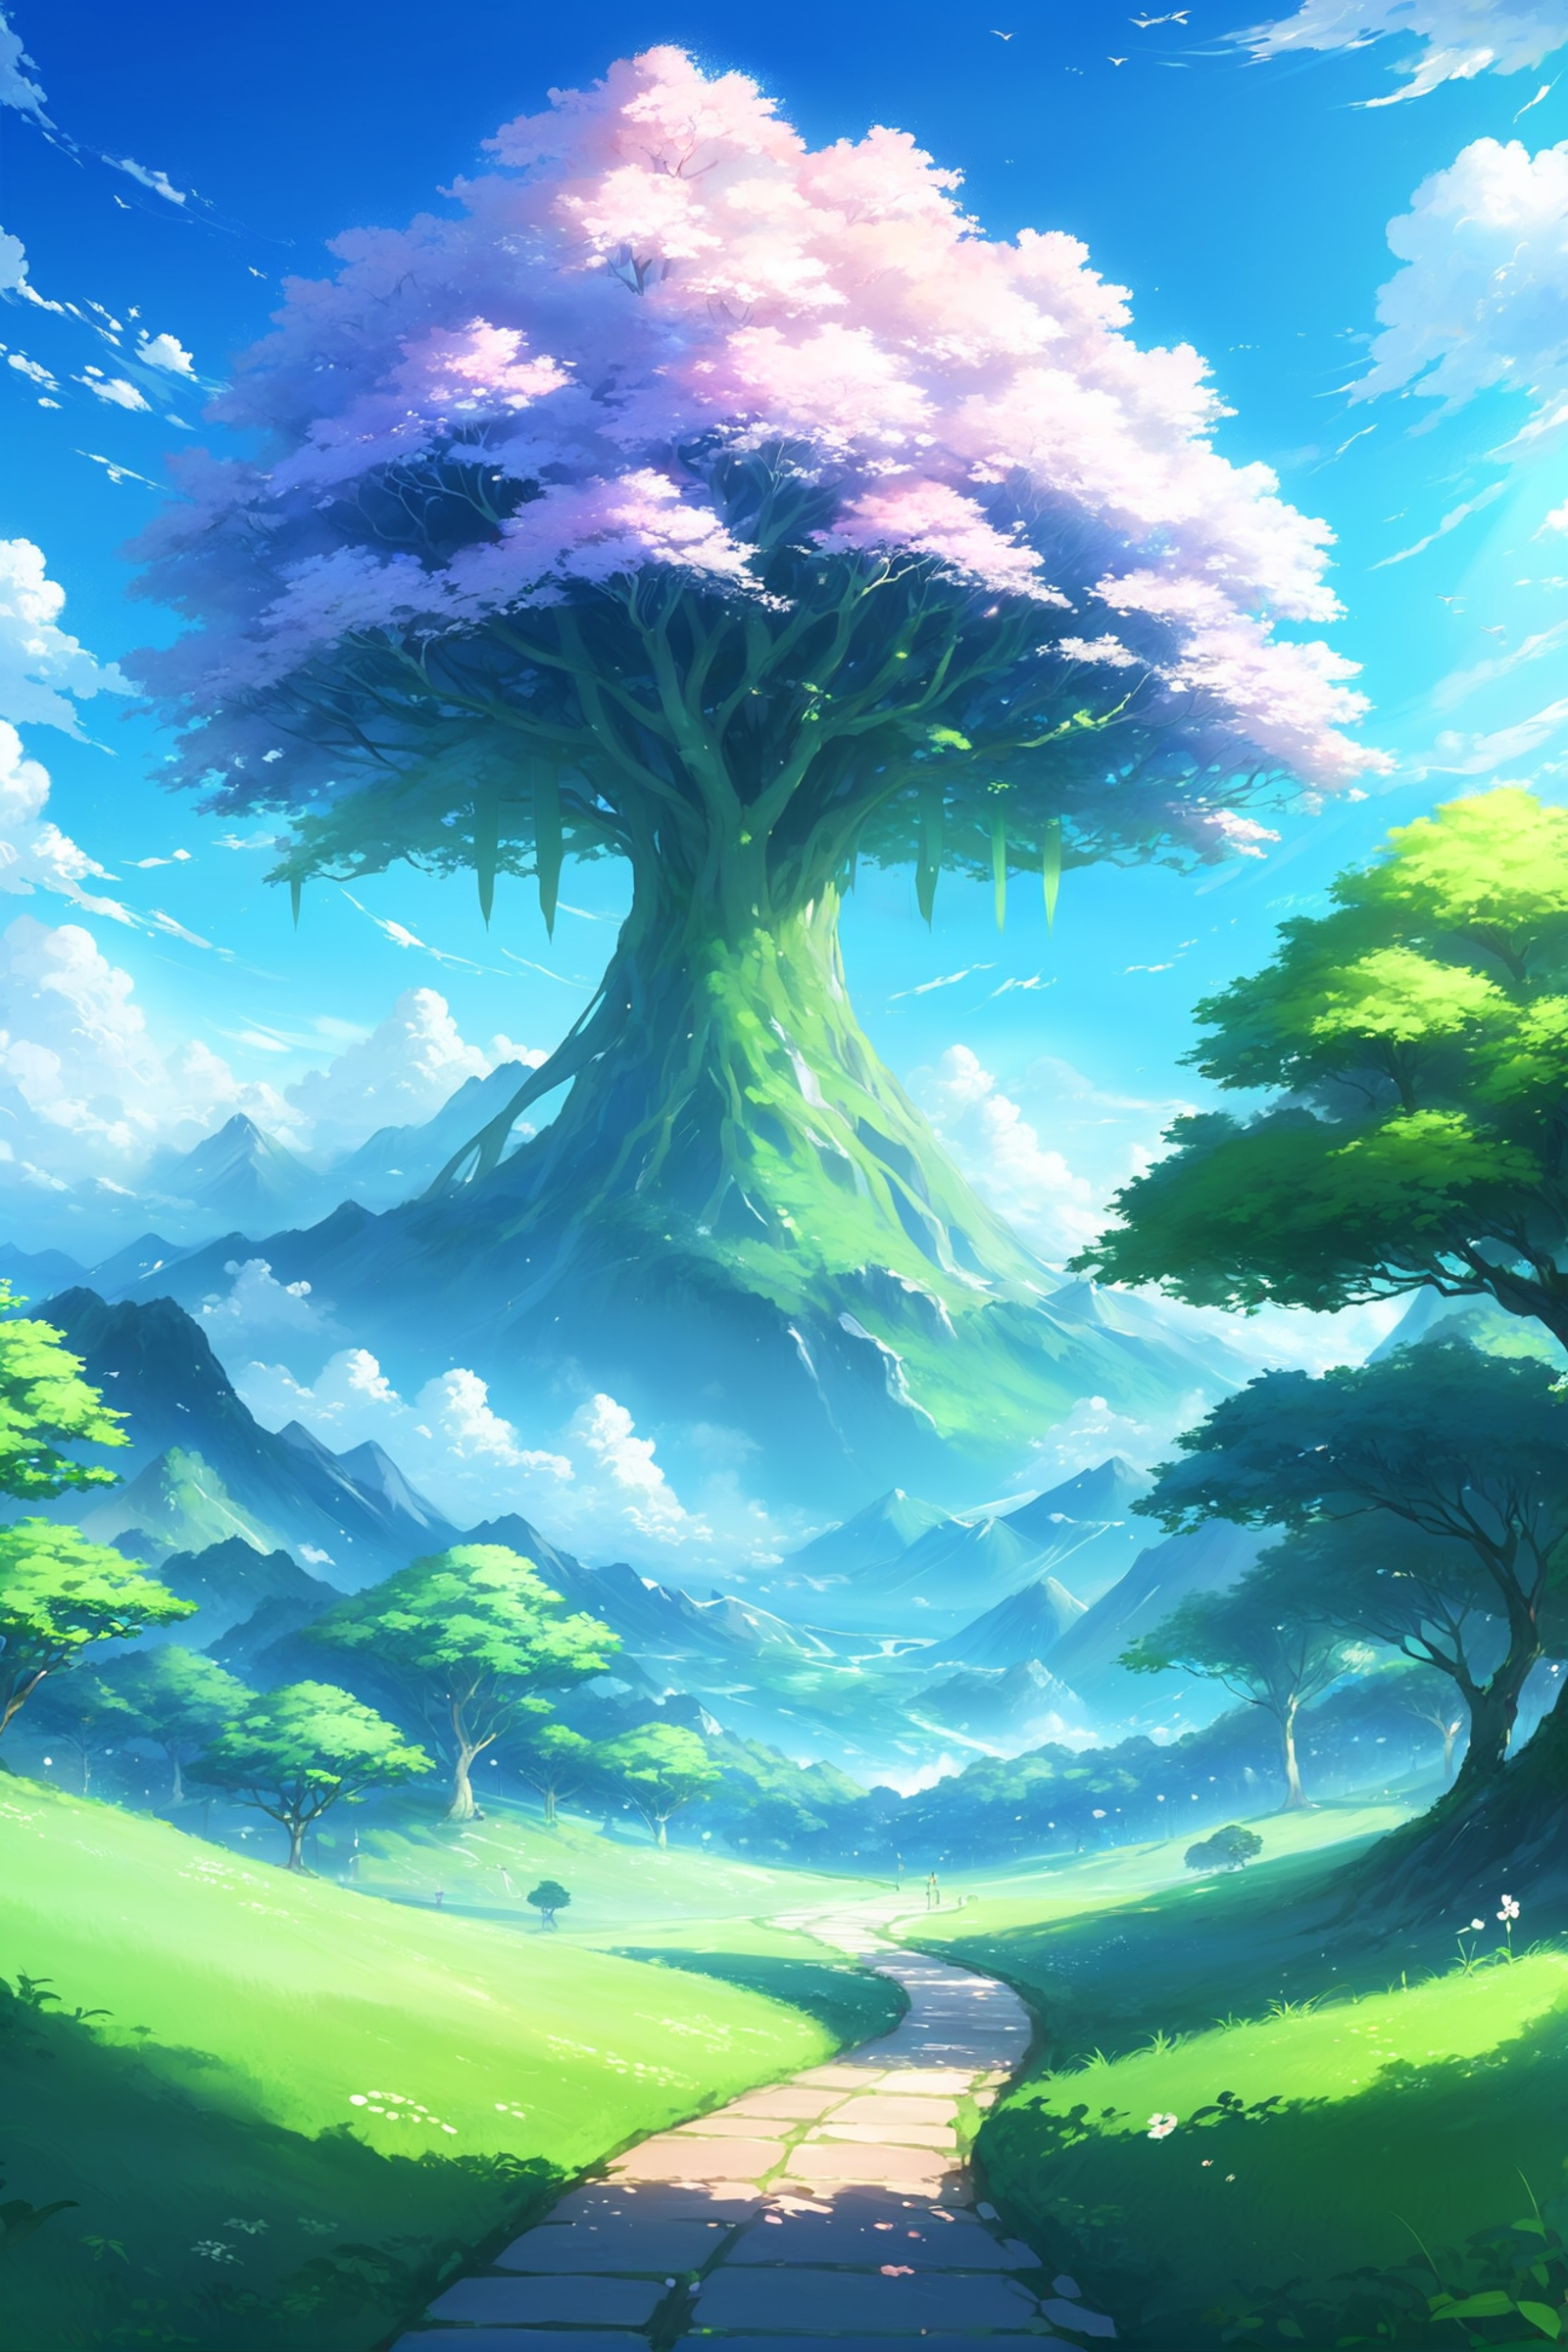 A beautiful, colorful landscape with a giant tree in the center.